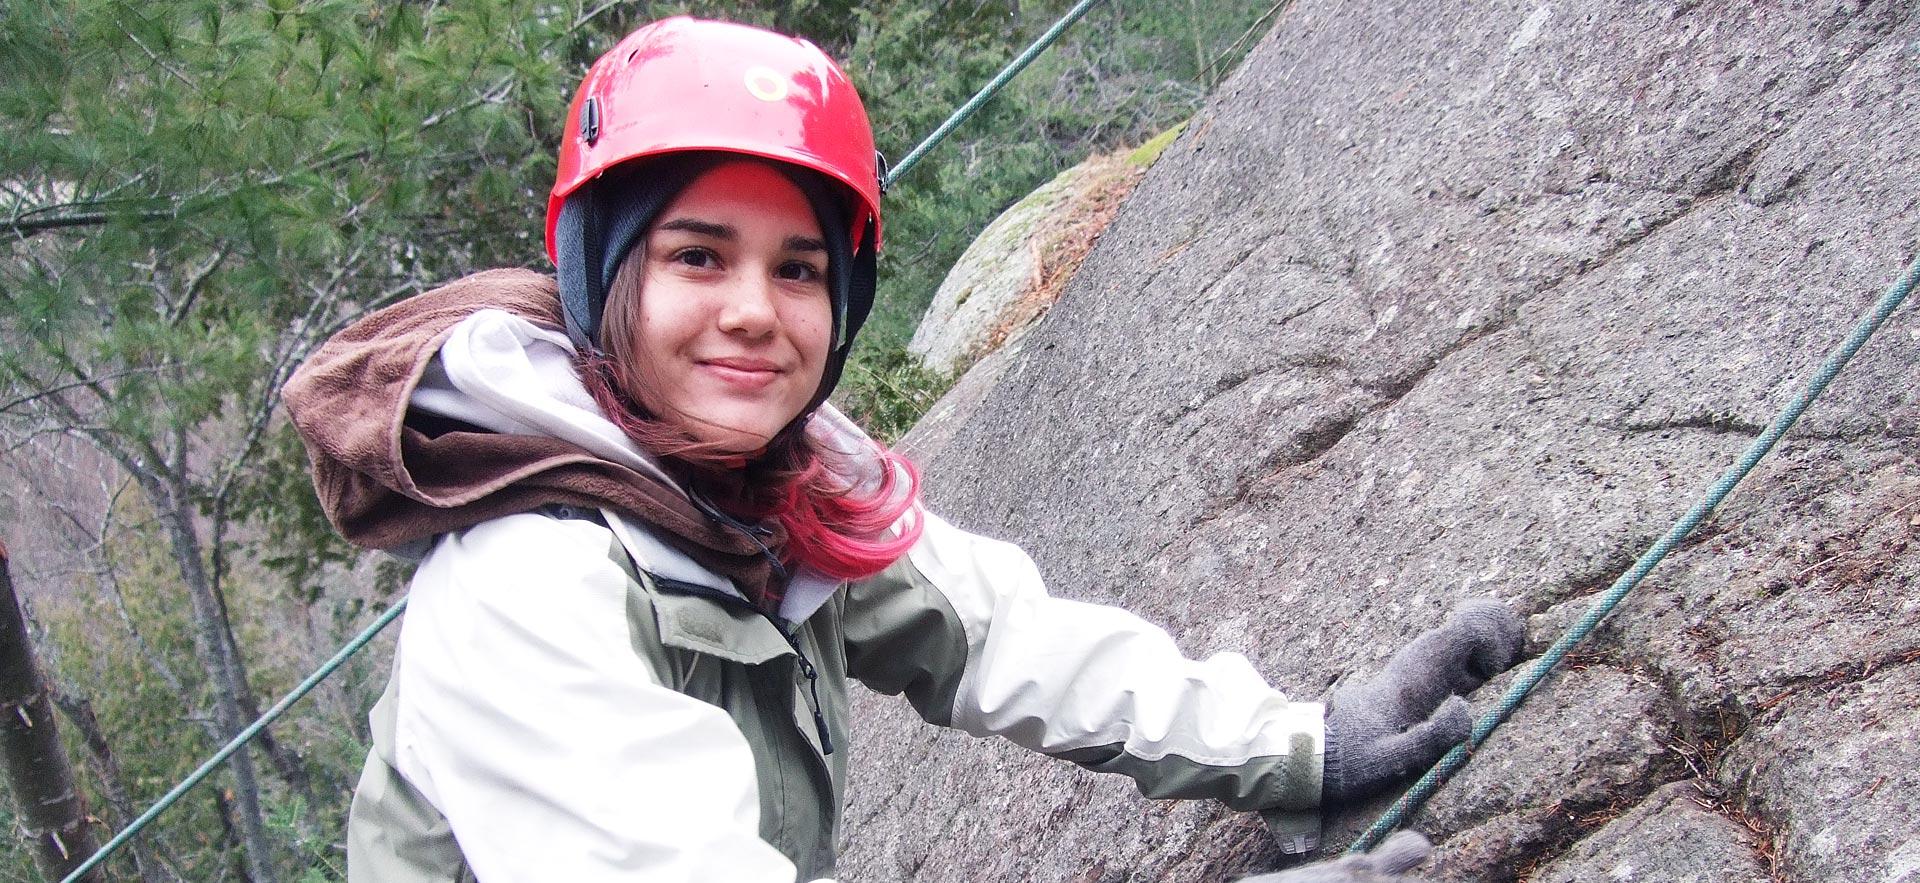 female student smiles for camera while rock climbing.